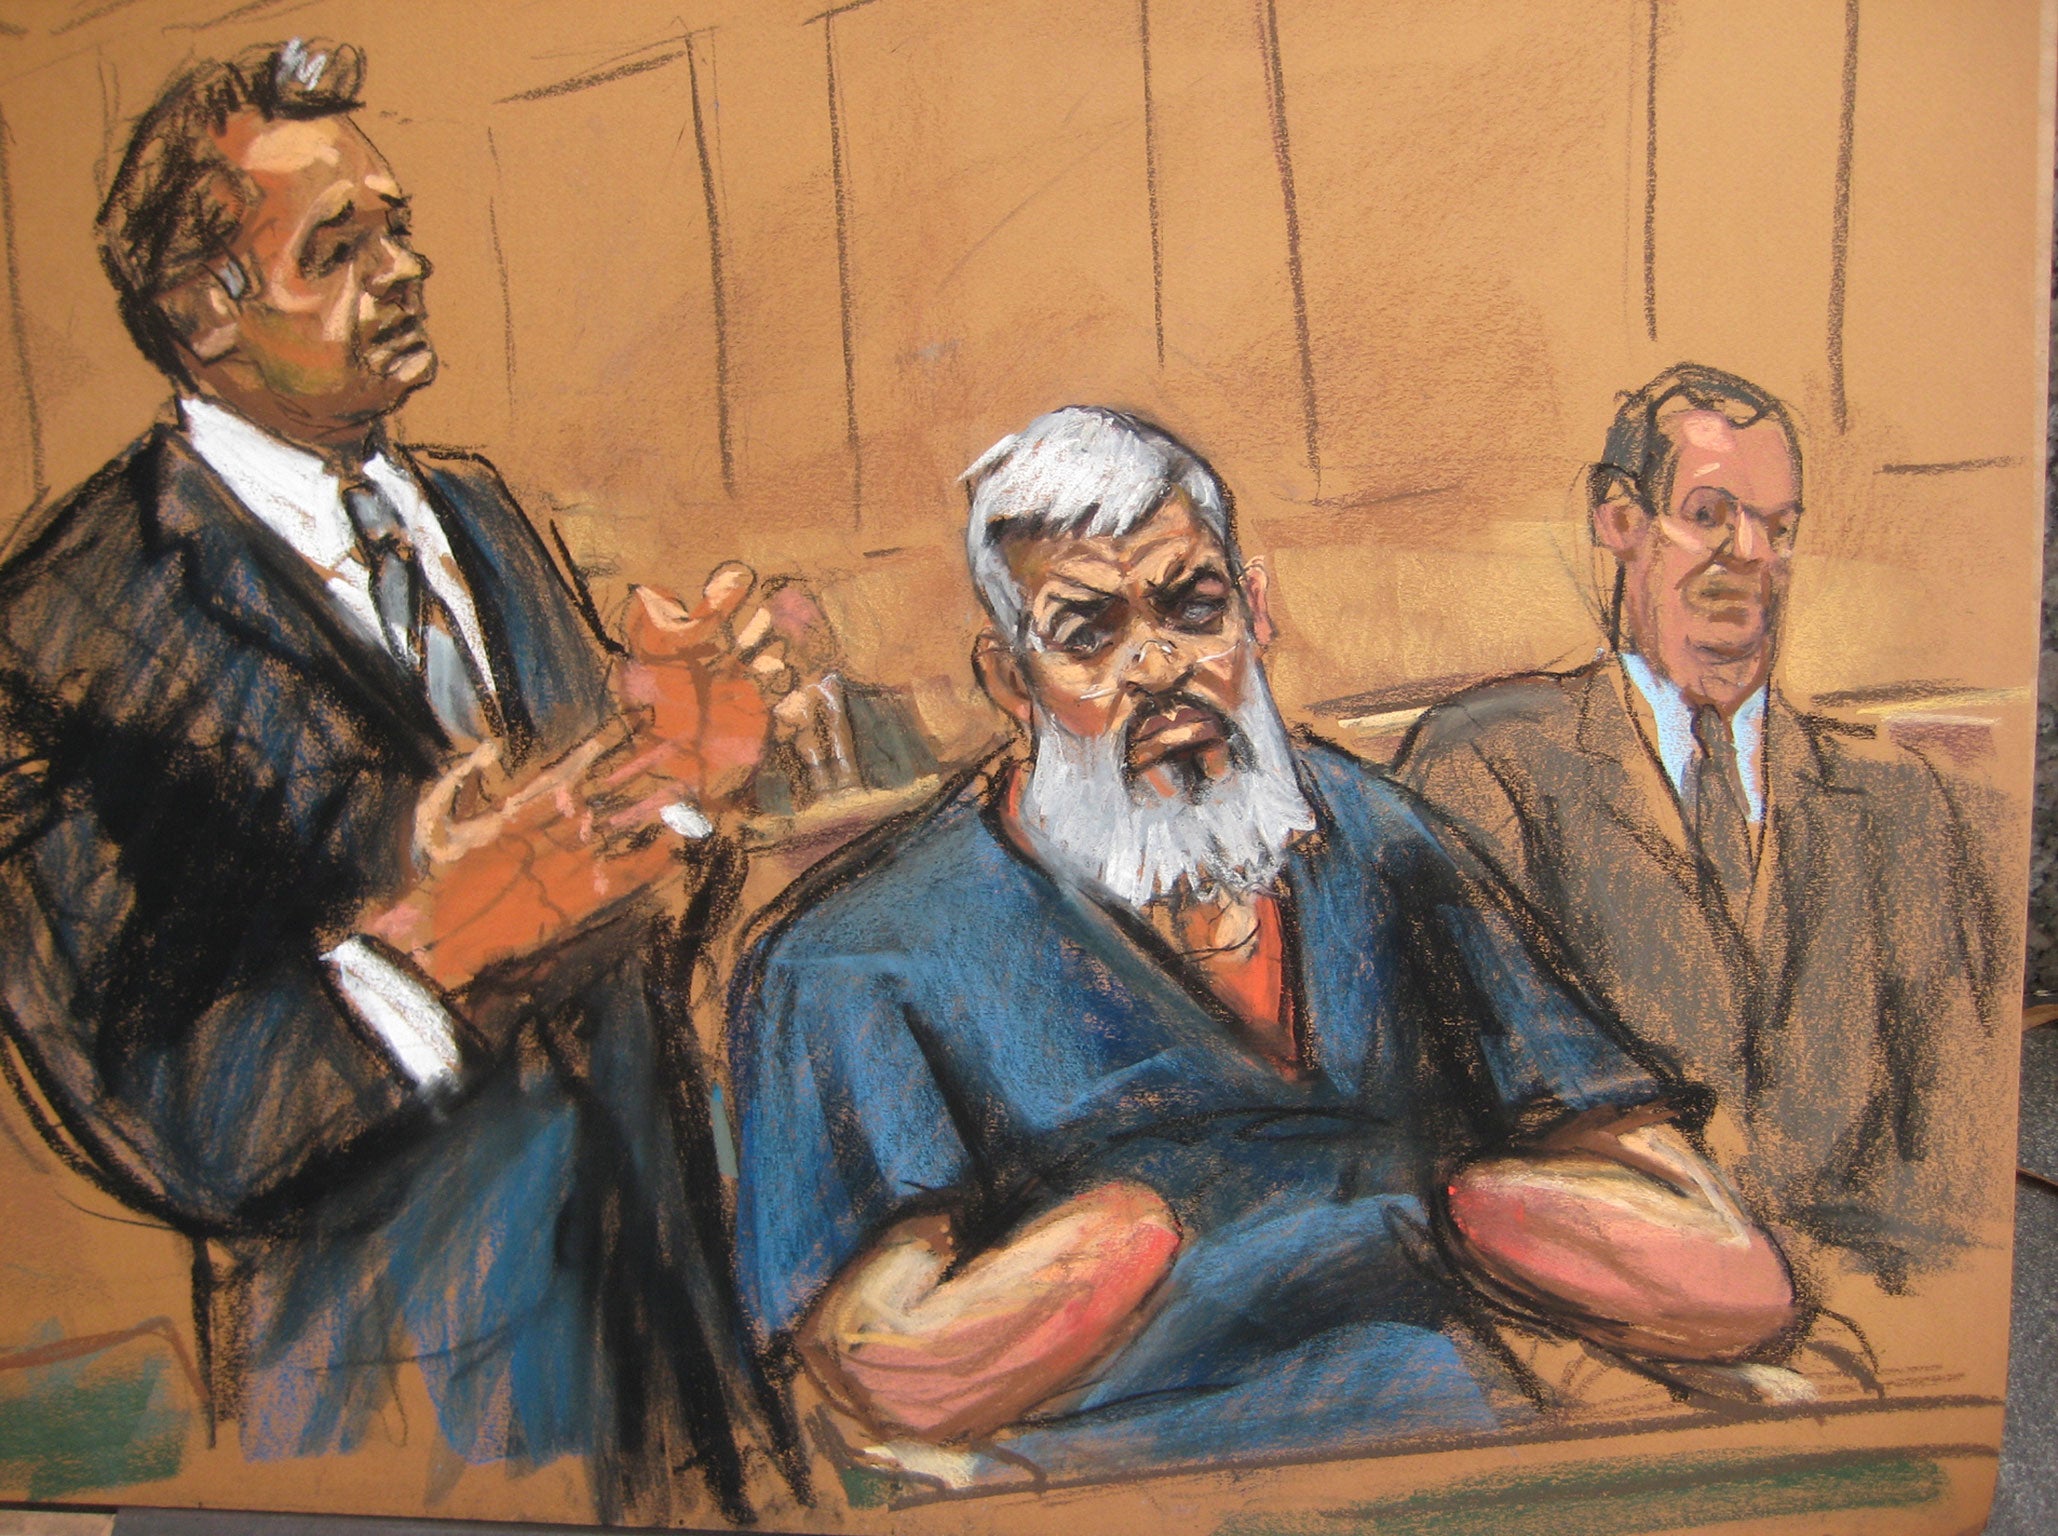 Sketch of Abu Hamza at a court hearing in 2012